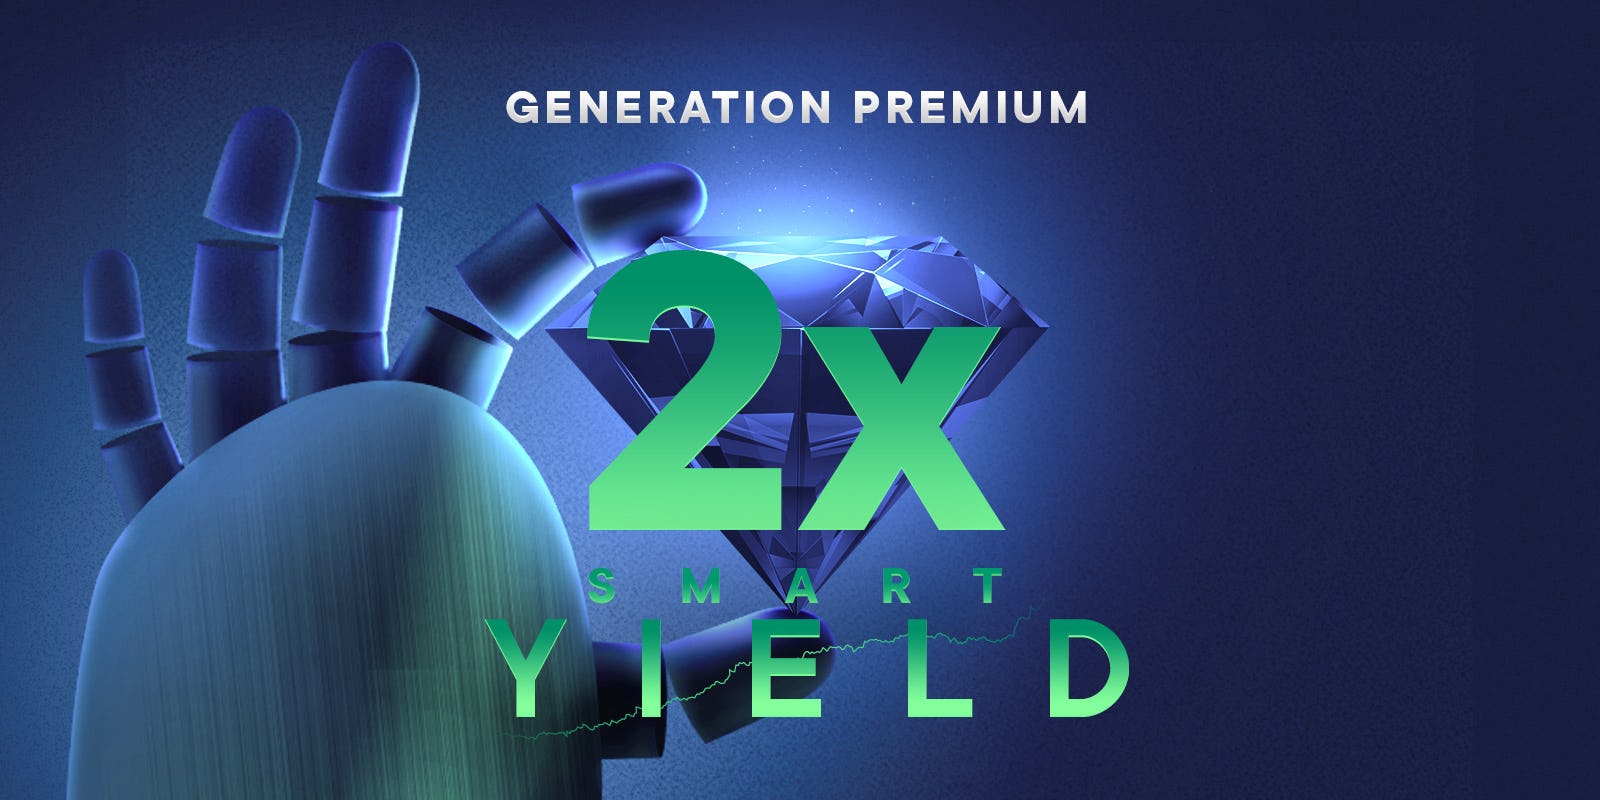 Generation Premium, rejoice! You now receive a 2X yield boost!